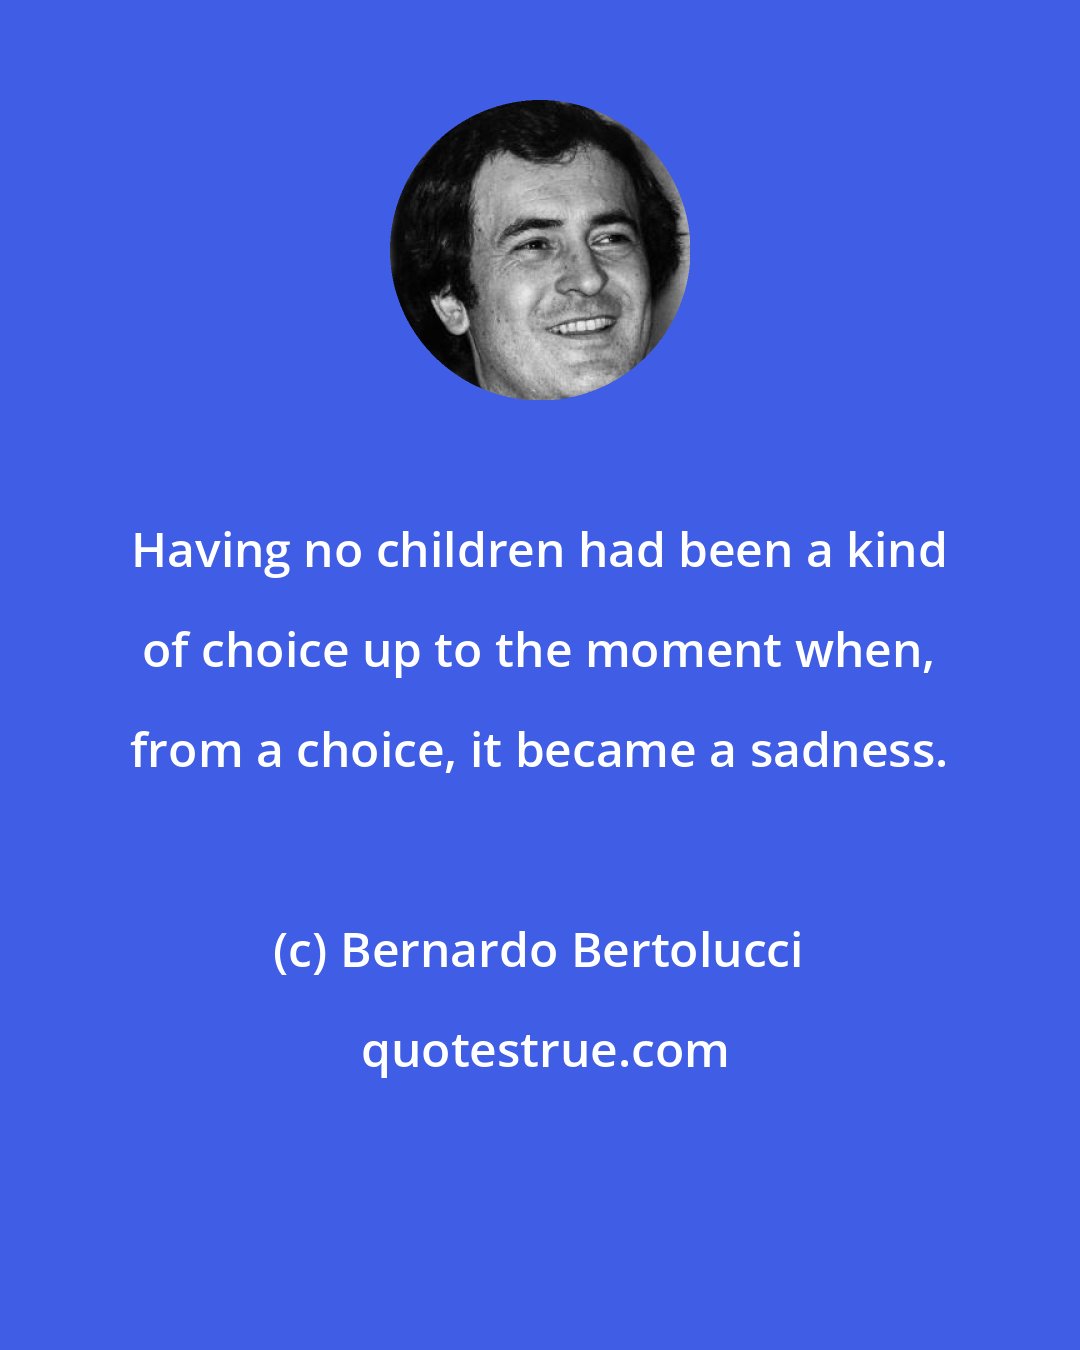 Bernardo Bertolucci: Having no children had been a kind of choice up to the moment when, from a choice, it became a sadness.